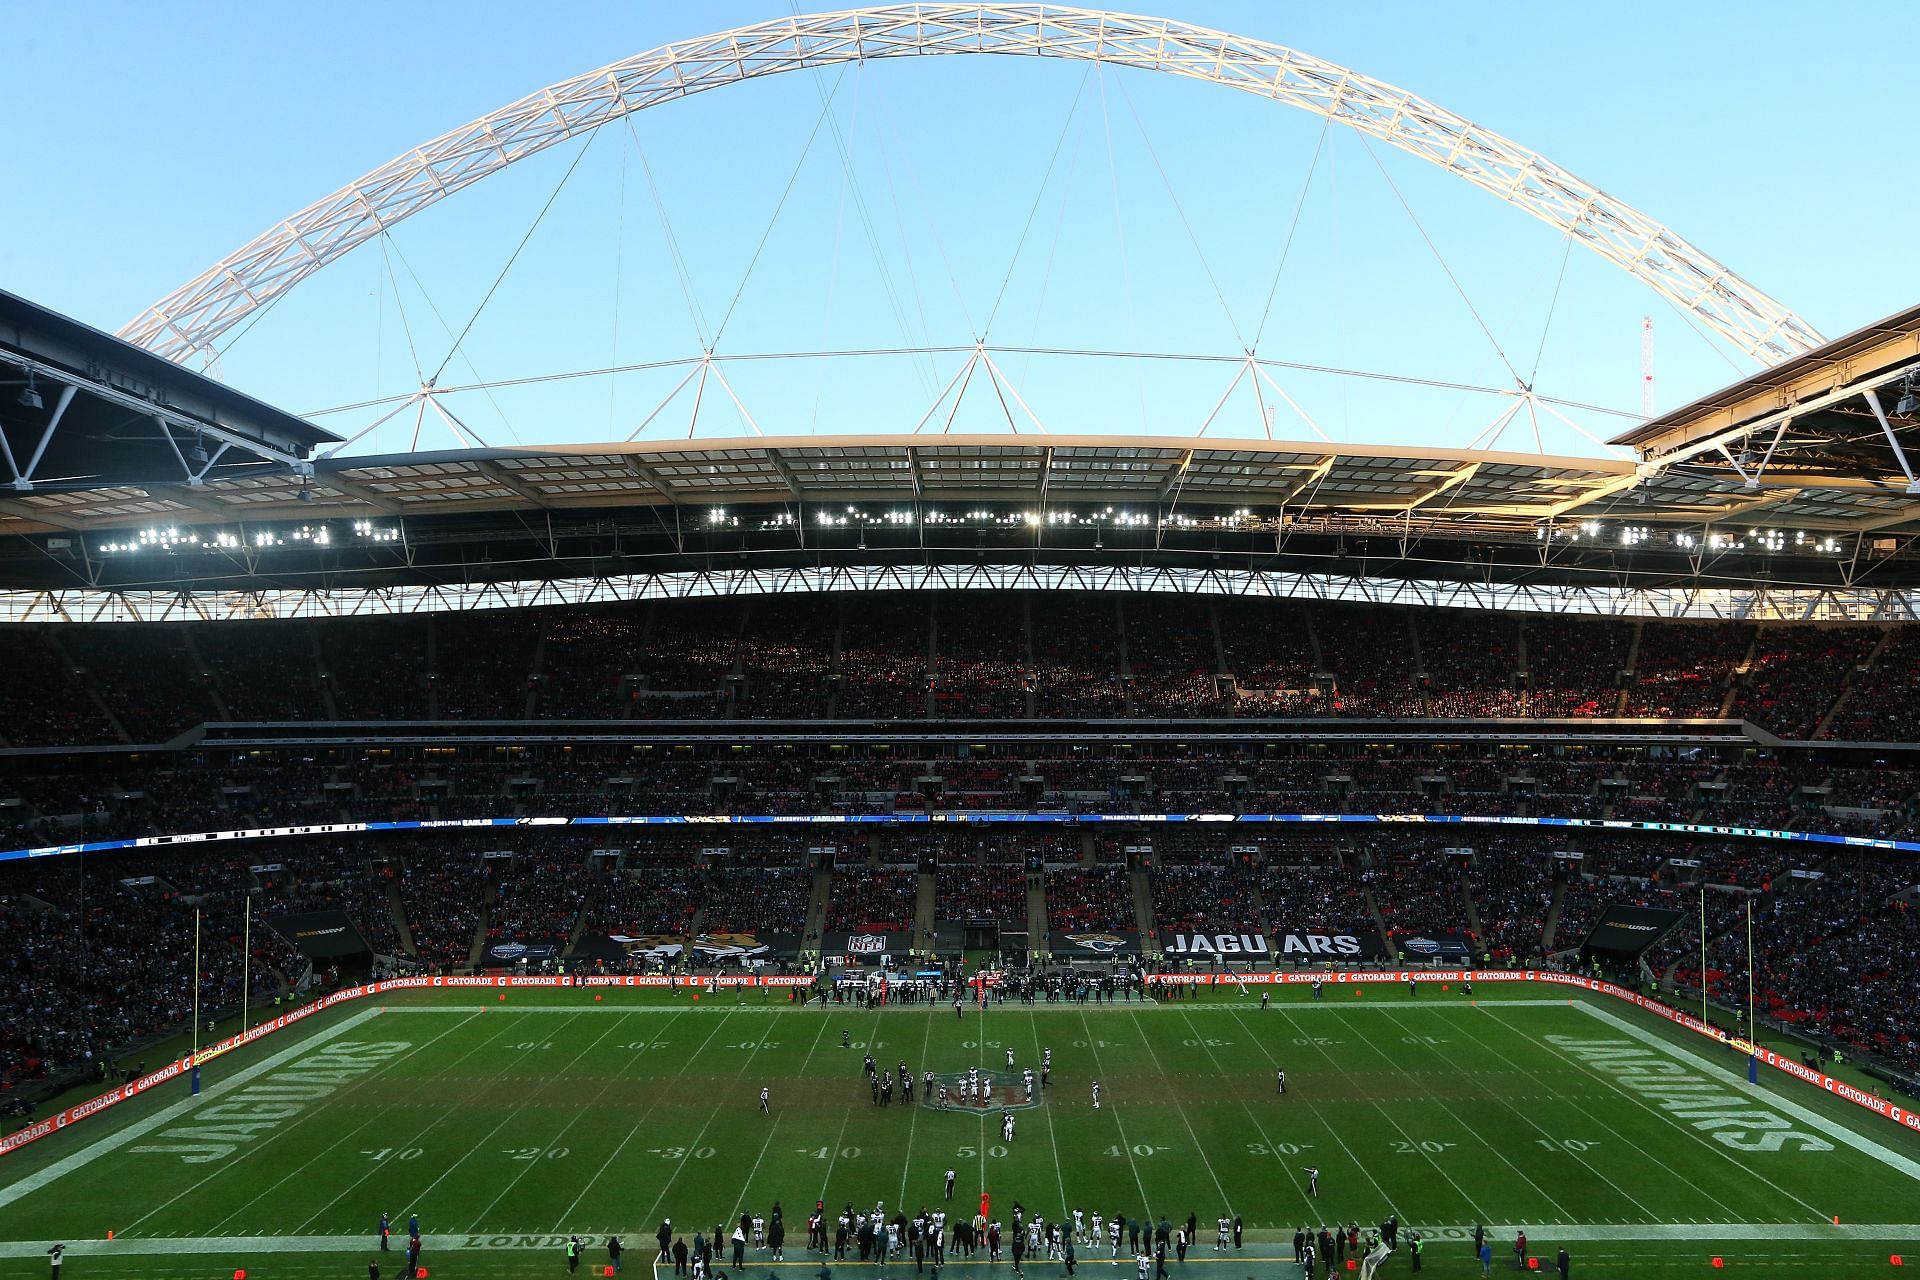 The NFL International Series match between Philadelphia Eagles and Jacksonville Jaguars at Wembley Stadium in 2018 in London, England